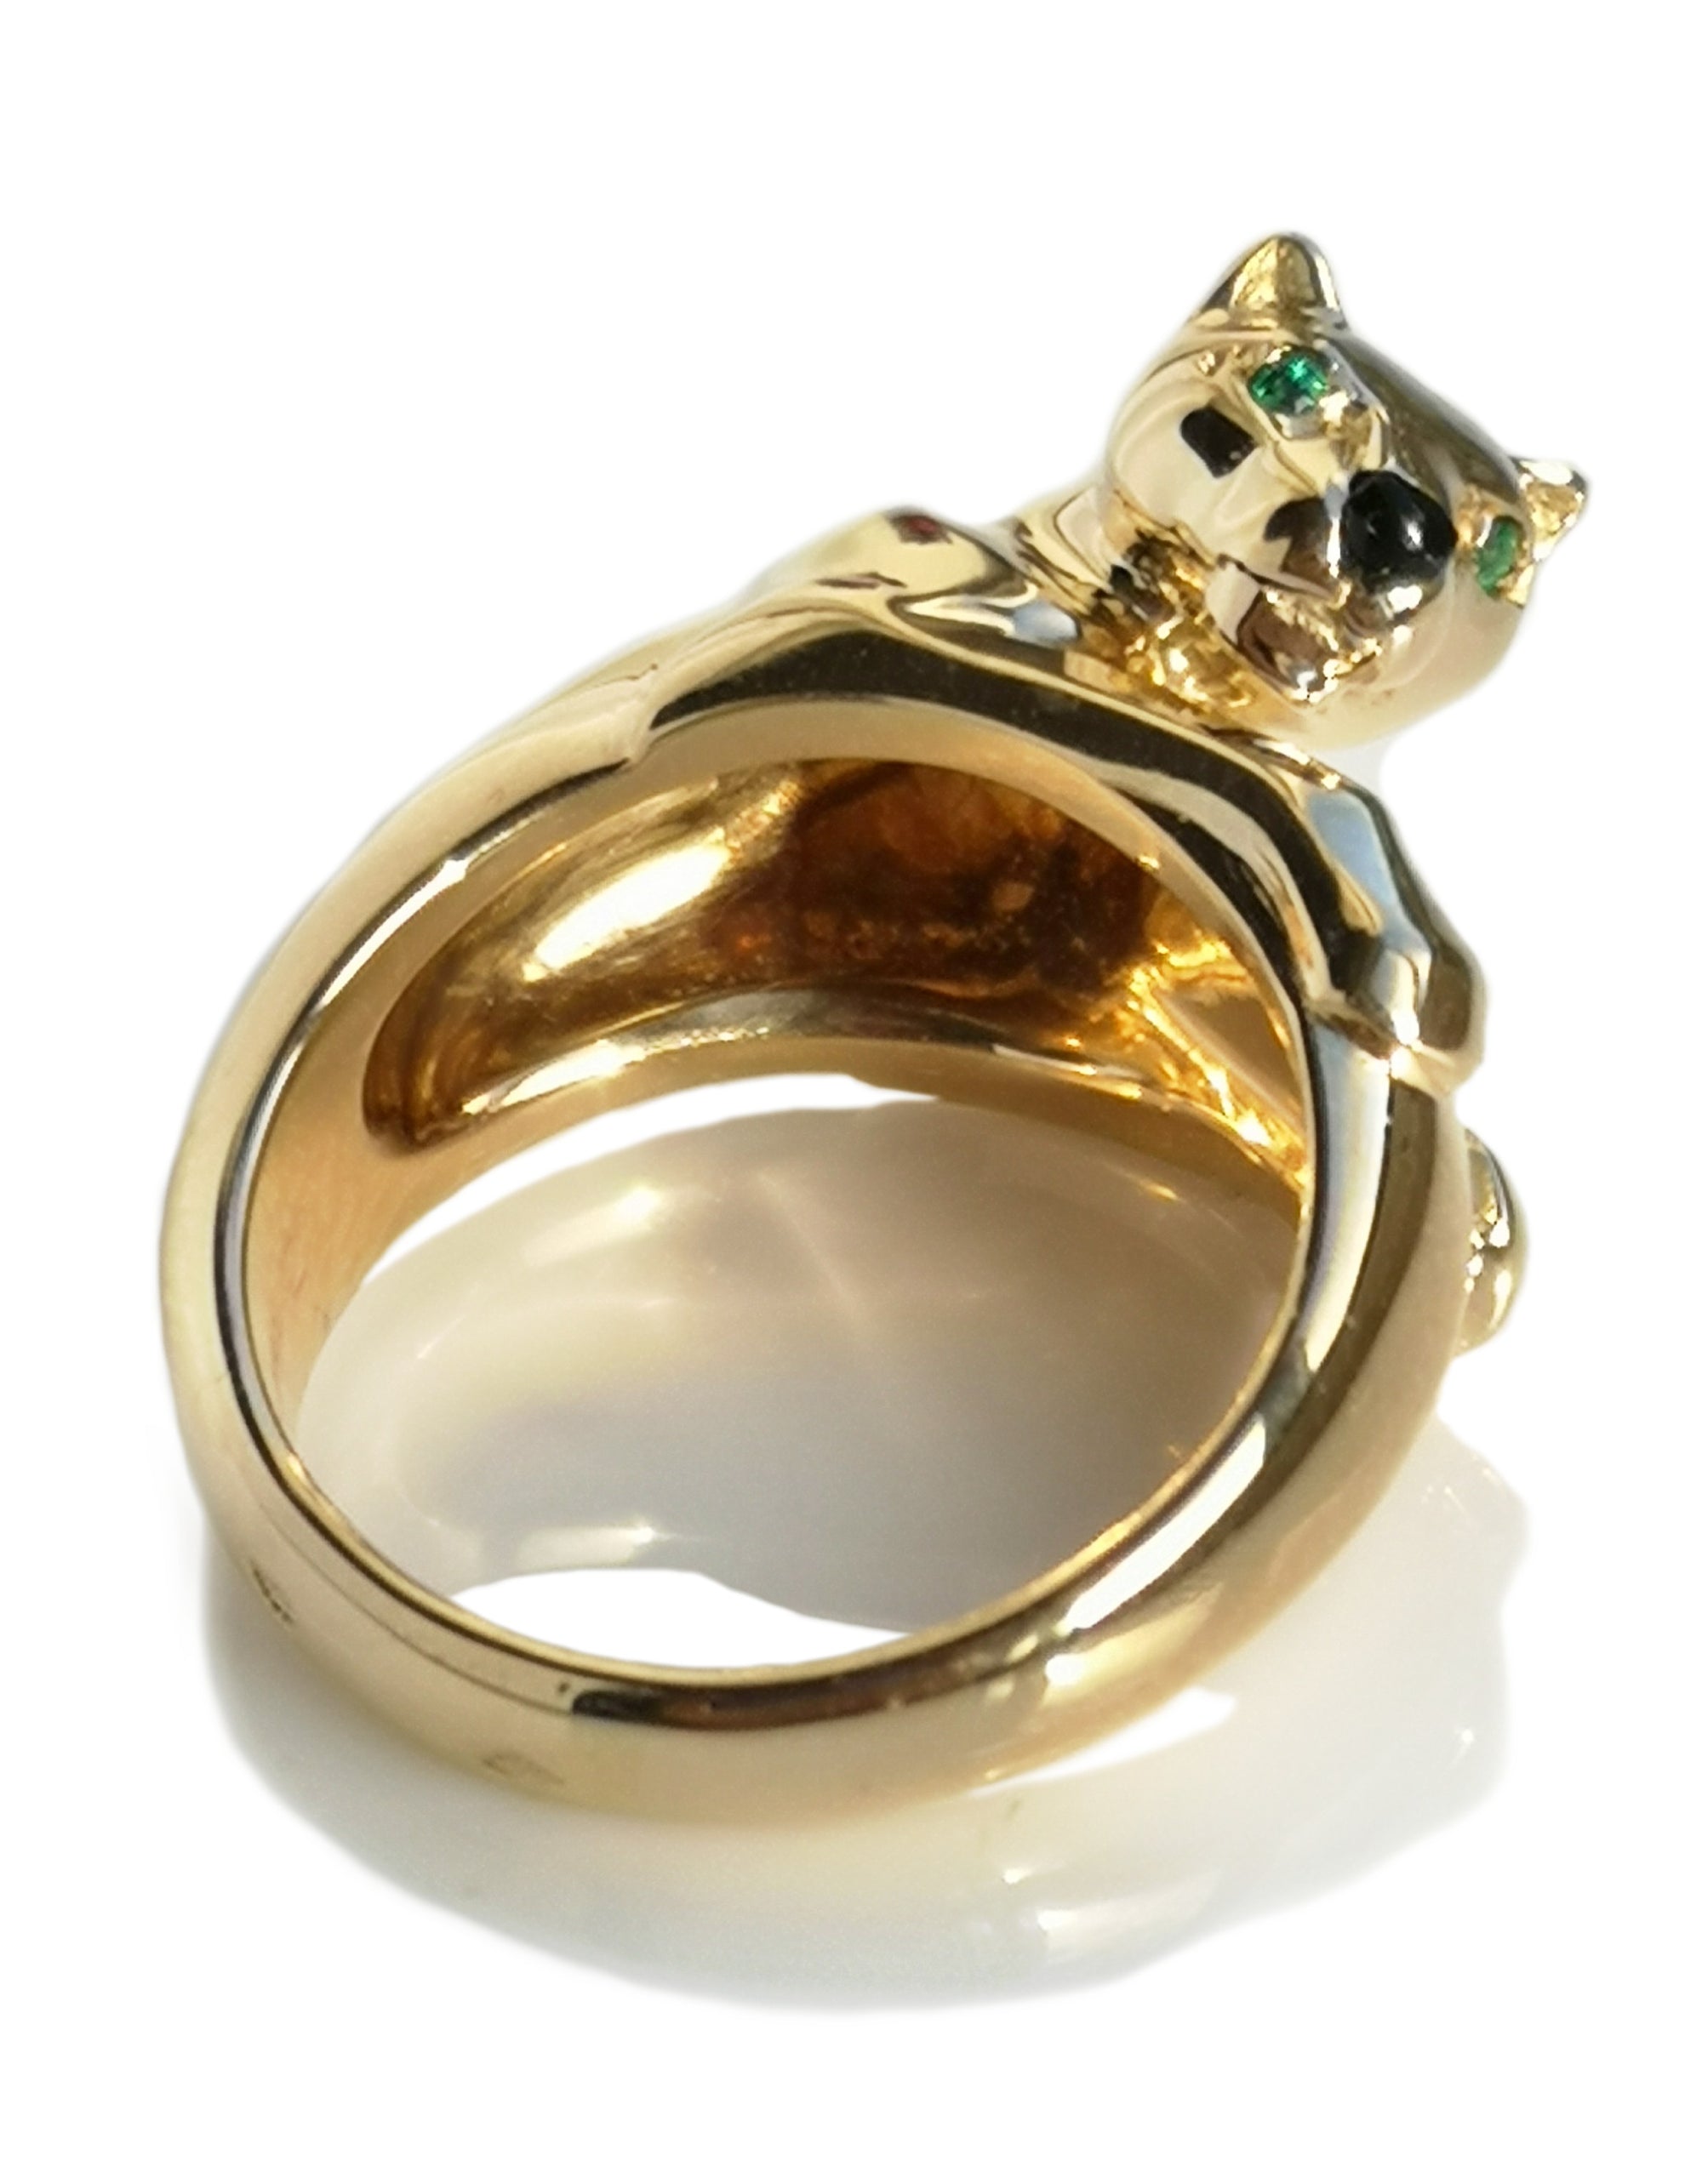 Cartier Panthere Ring in 18k Gold & Emerald, Size 50